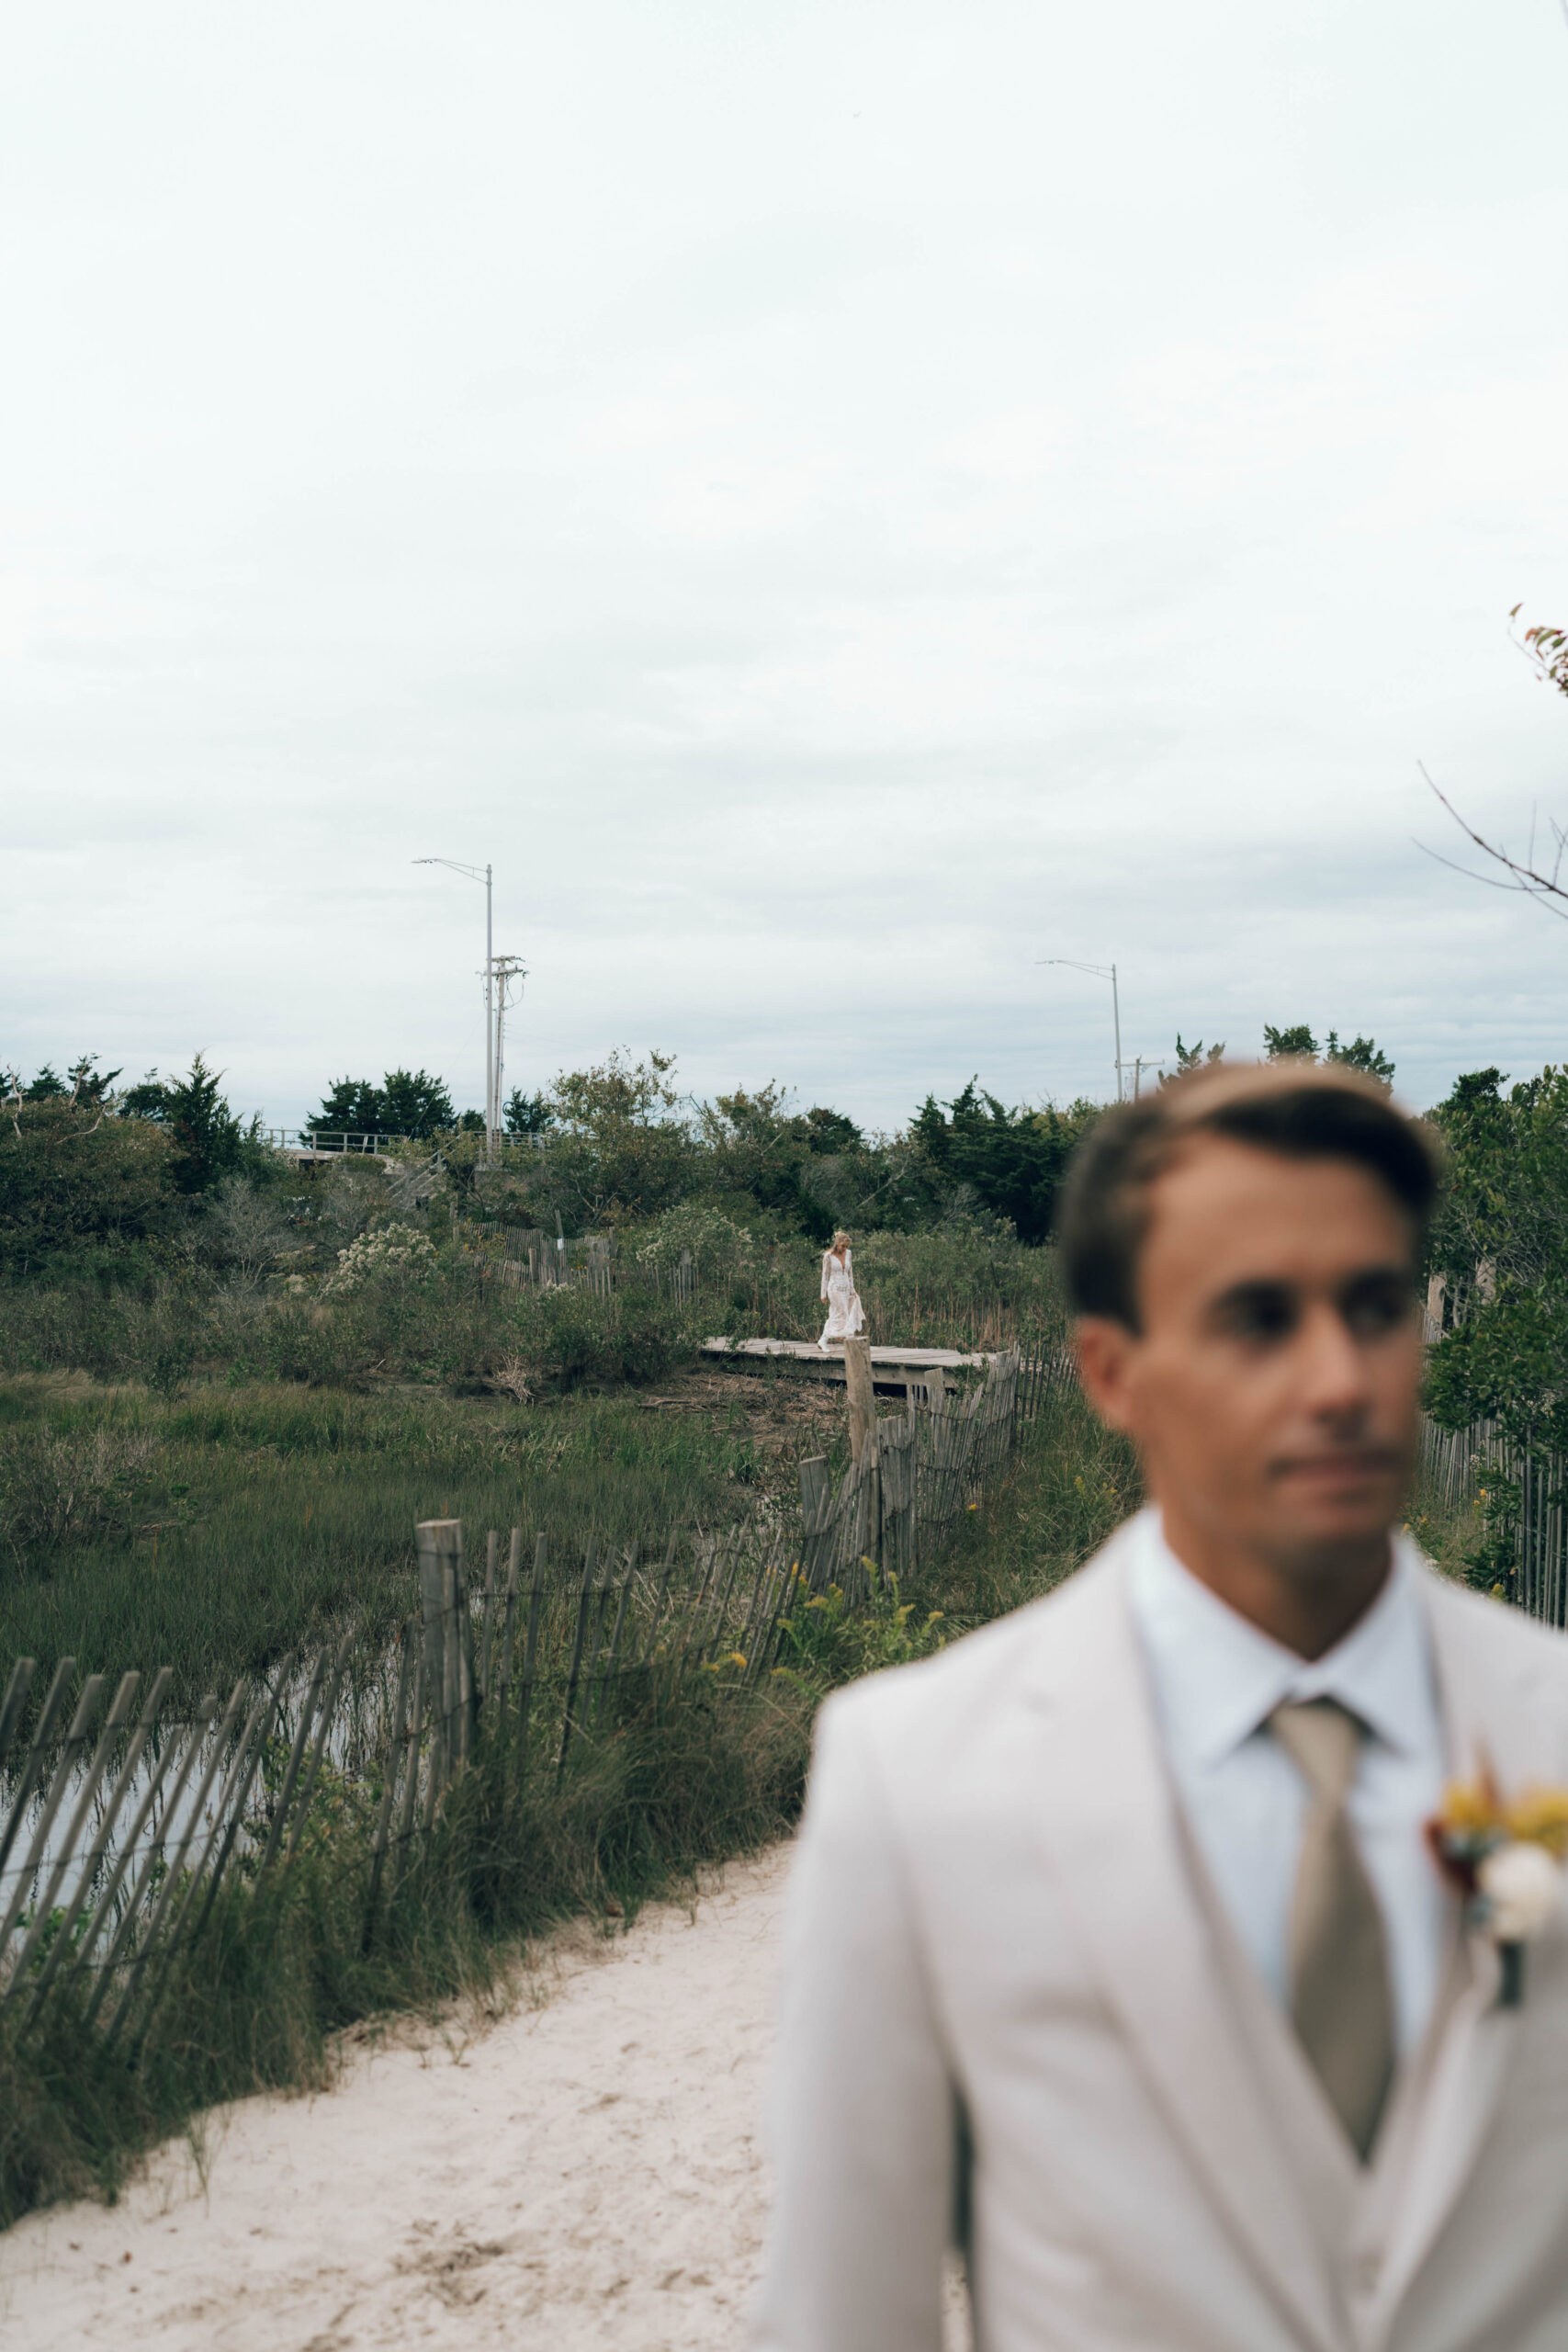 A Beach Surf Wedding with a Vintage Twist by Kayla Shenk Photography